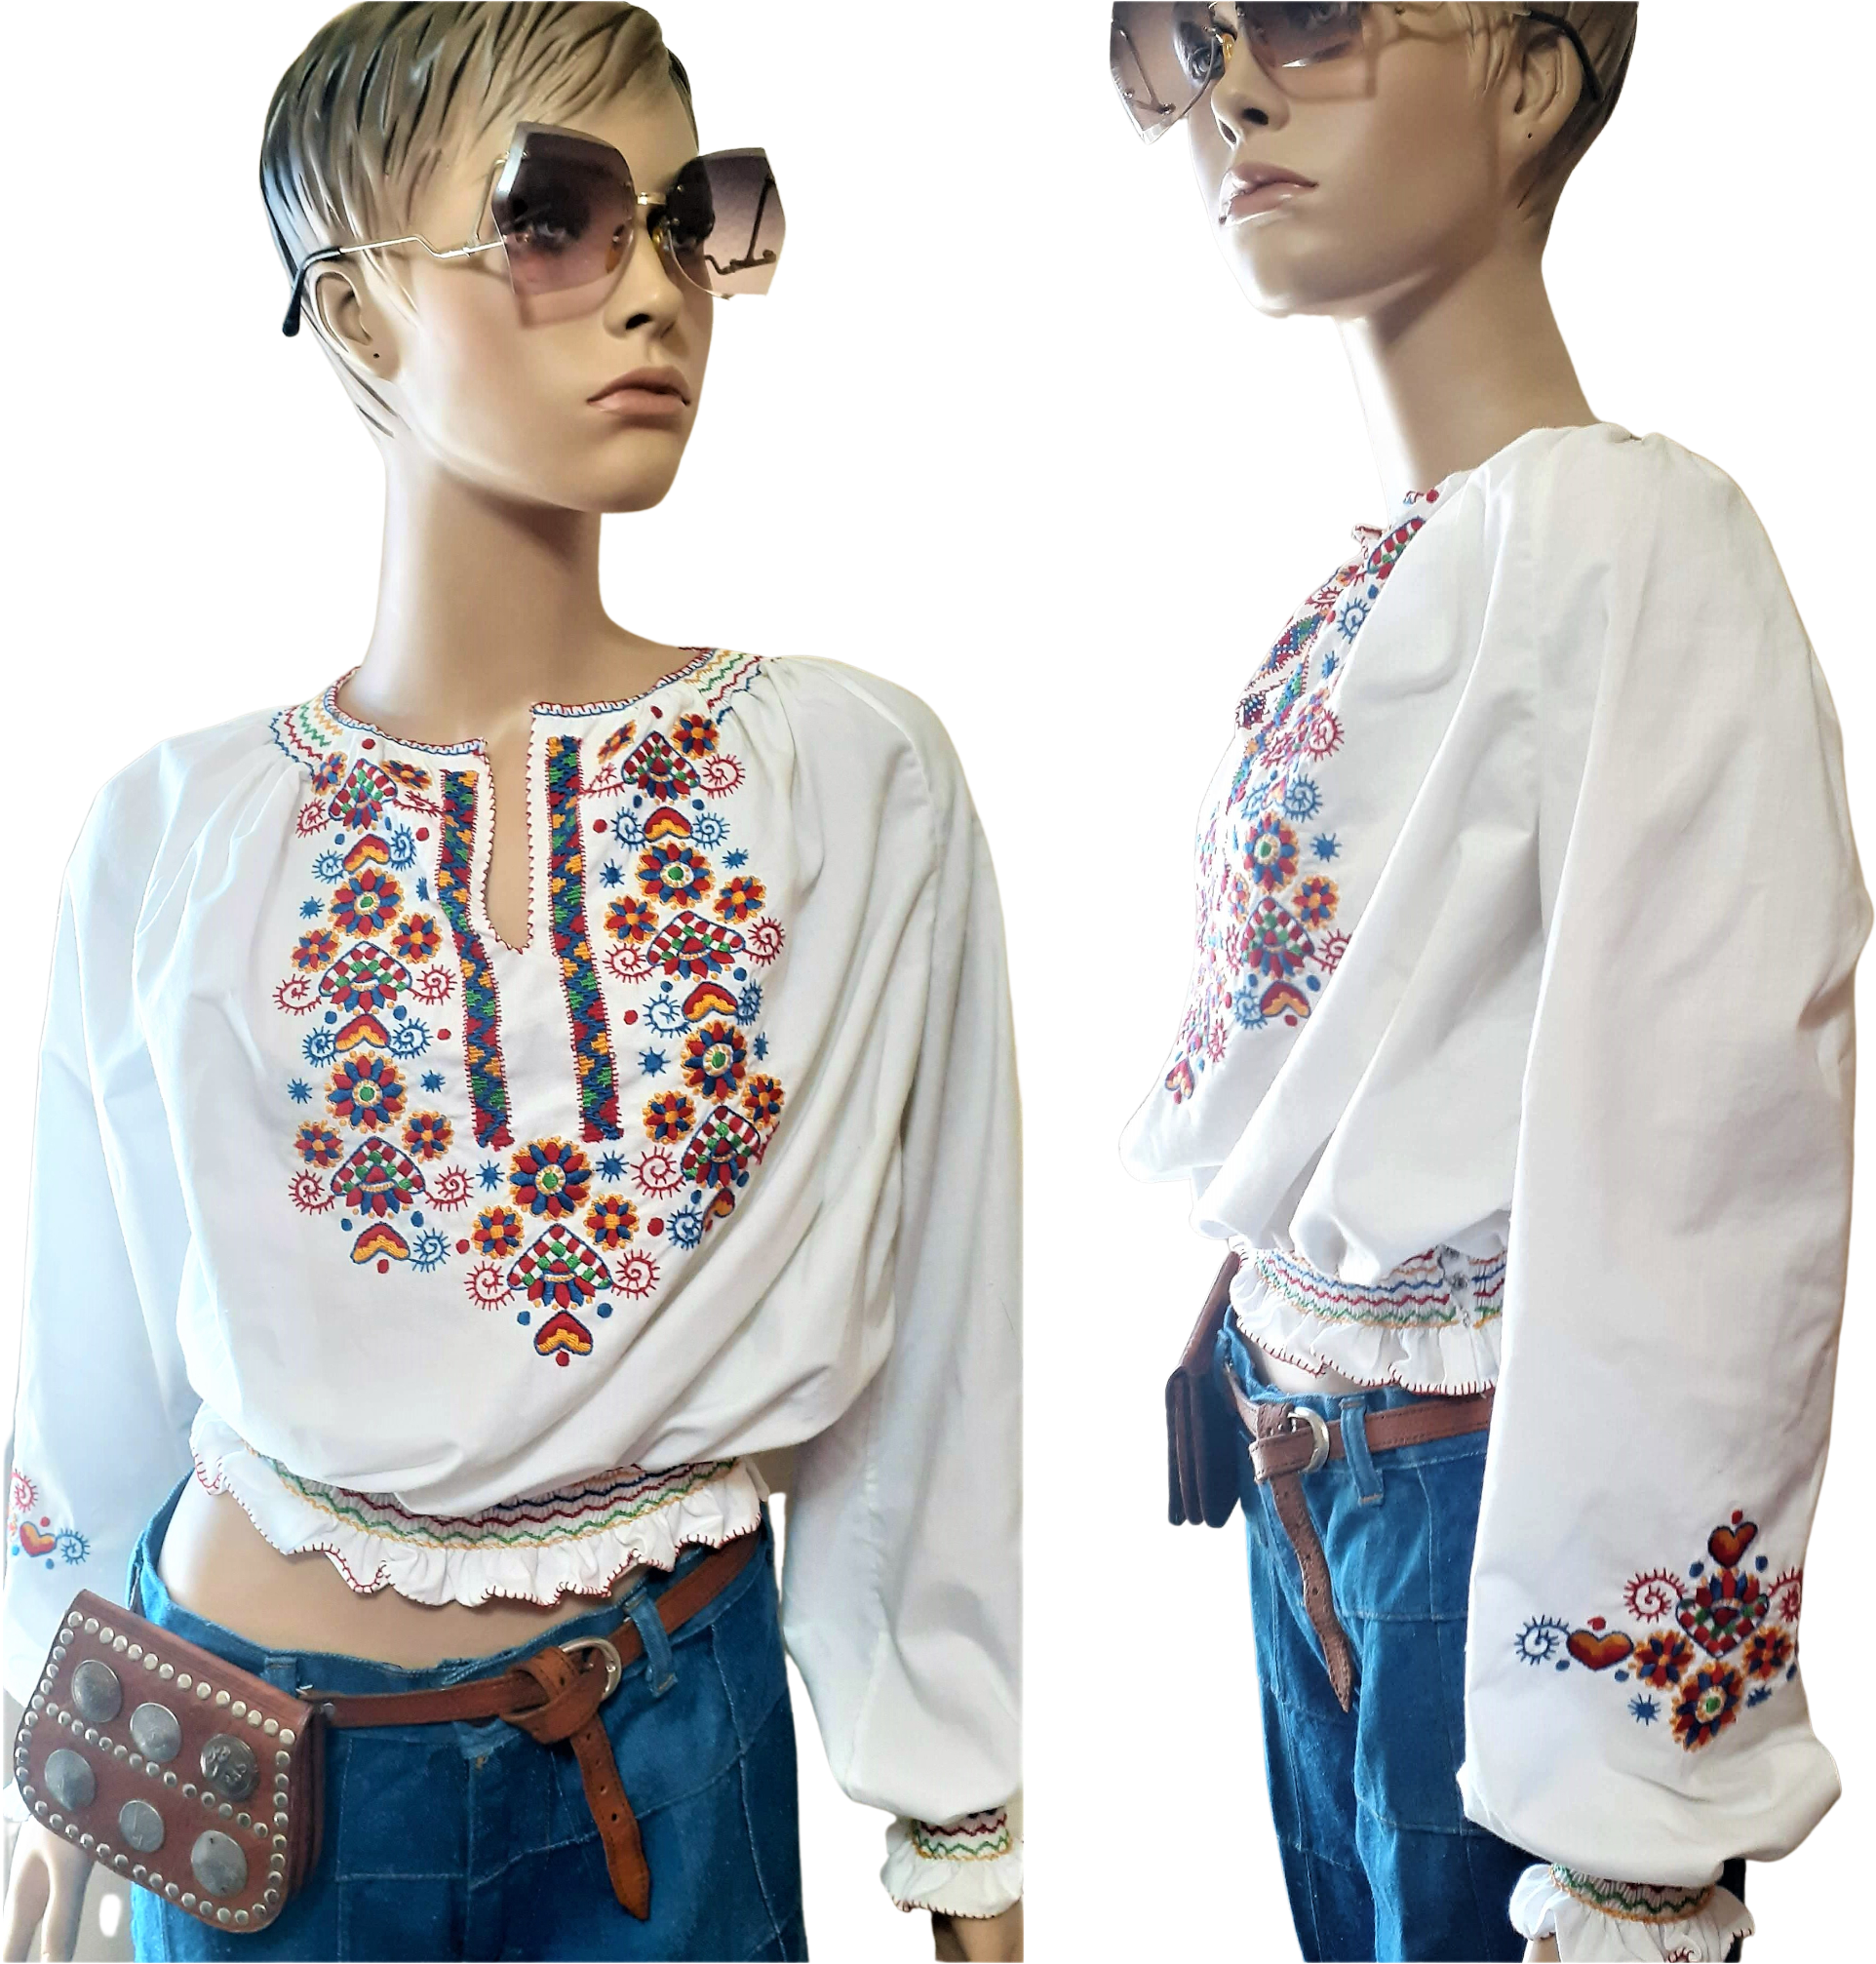 100% cotton Embroidered top Peasant blouse Flower Power boho Hippie  psychedelic